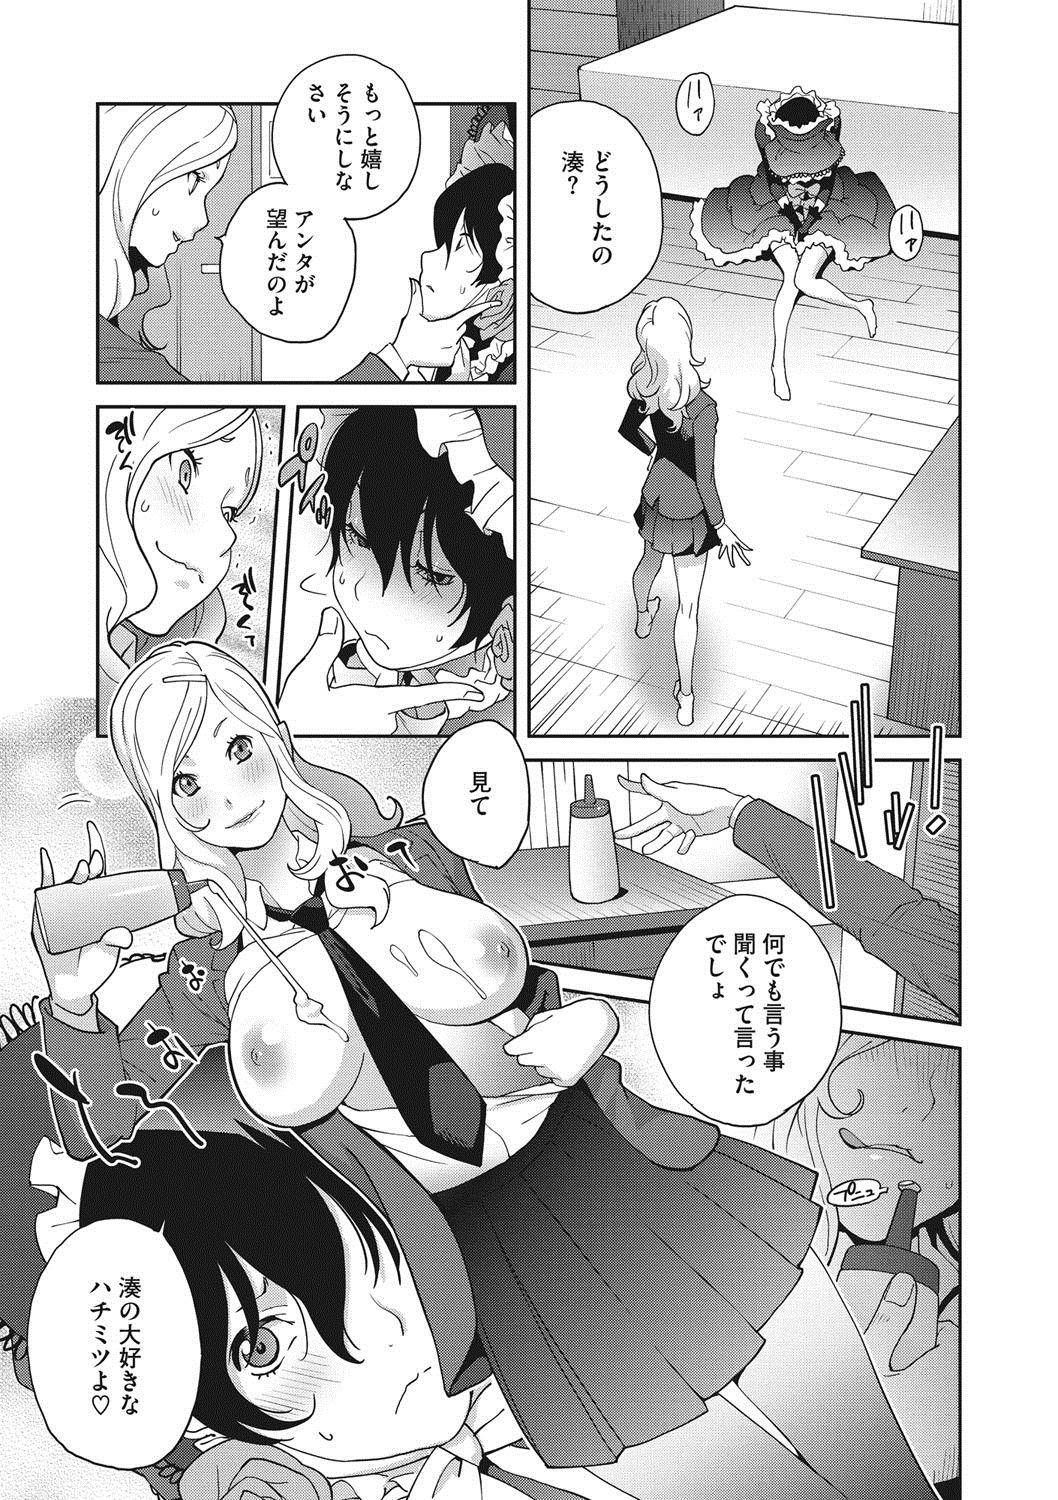 [Kotoyoshi Yumisuke] Haha to Ane to Aoi Ichigo no Fromage - Fromage of mother and an older sister and a blue strawberry Ch. 1-4 44